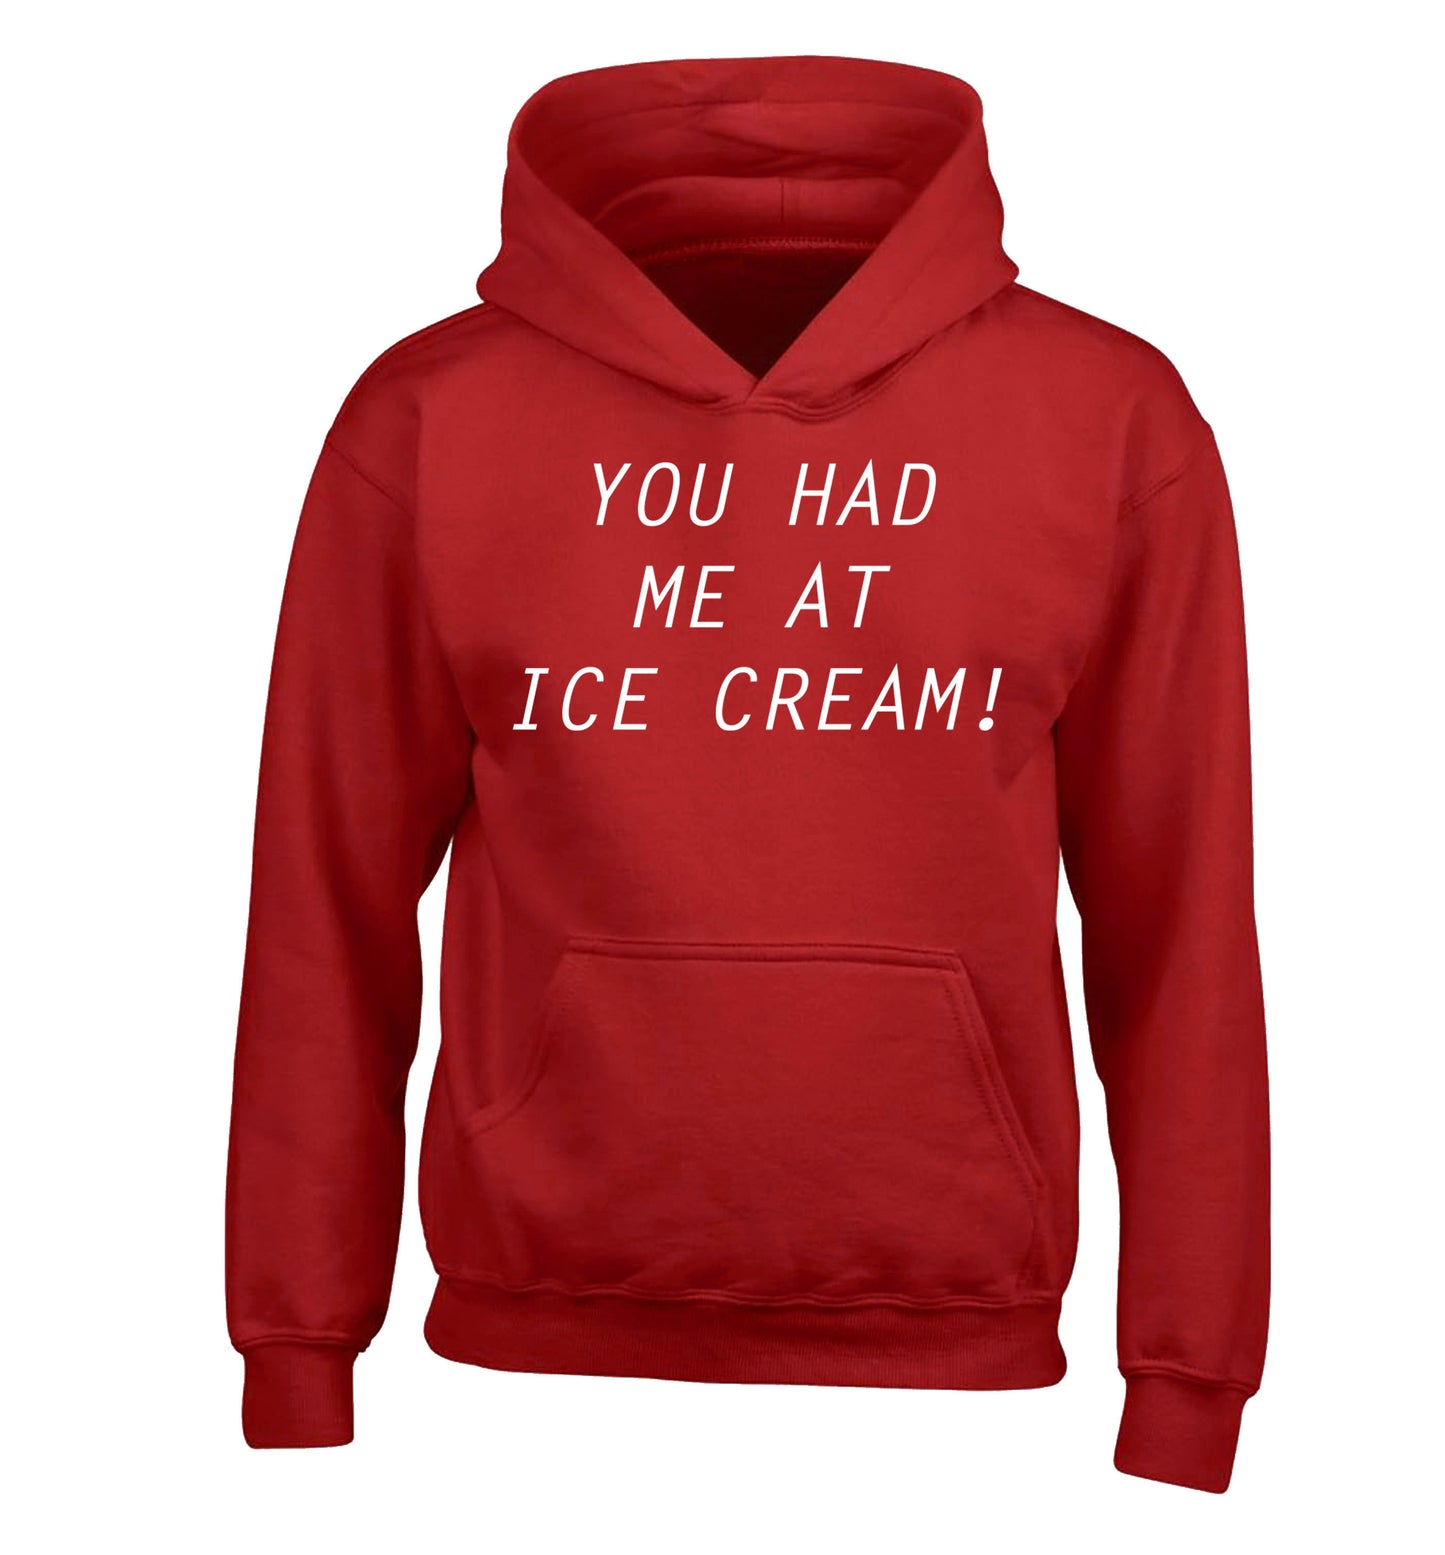 You had me at ice cream children's red hoodie 12-14 Years